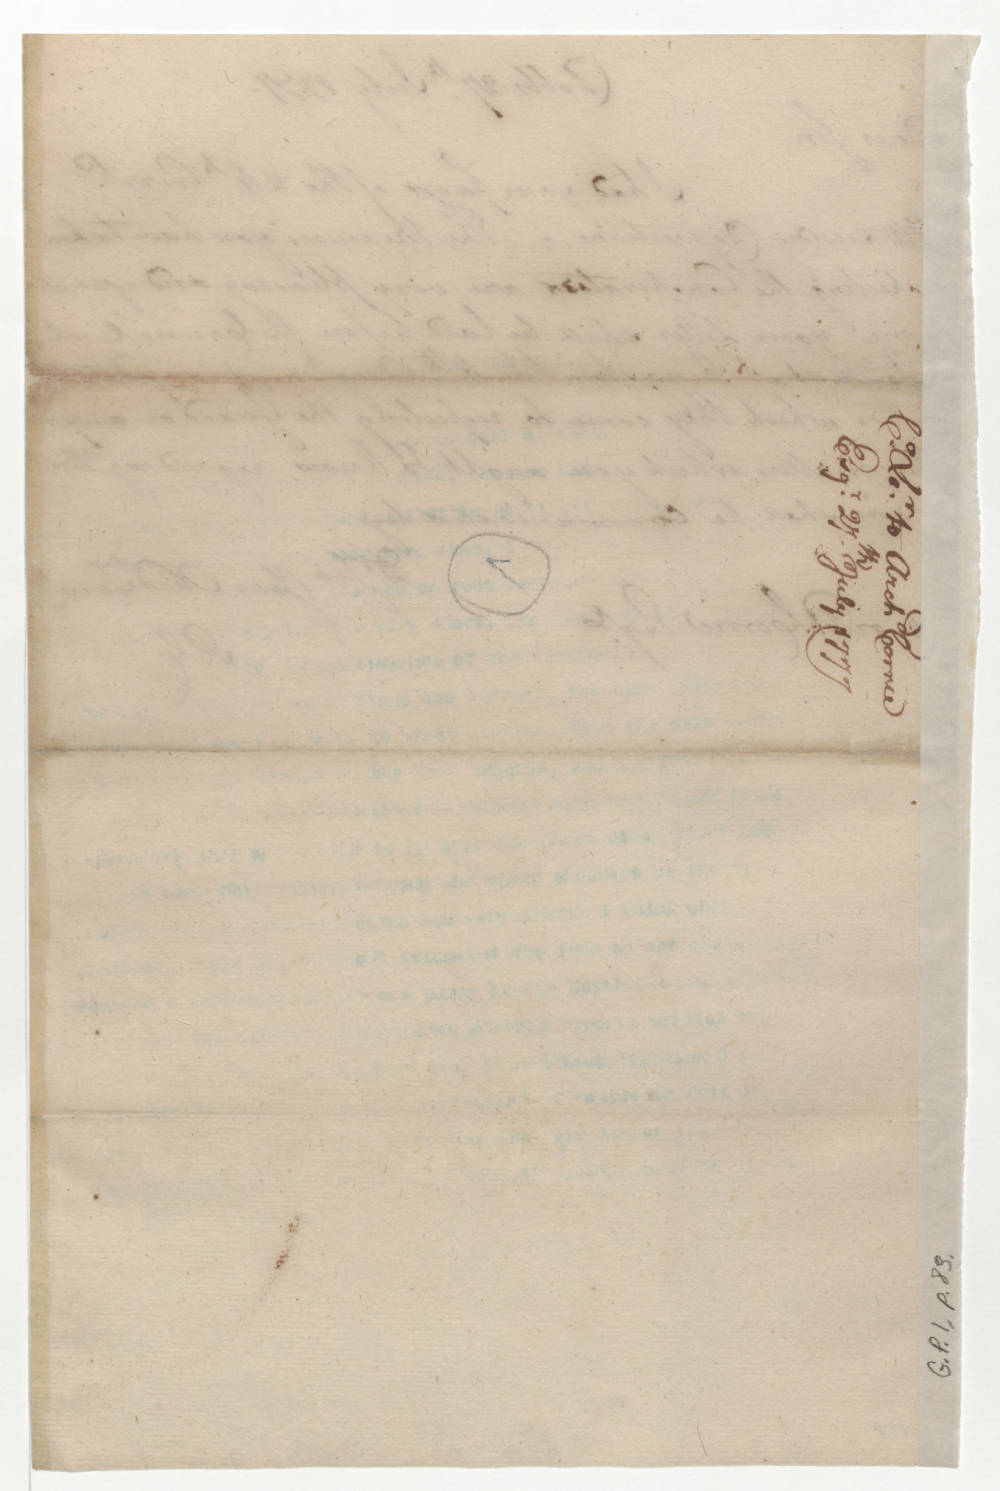 Letter from Richard Caswell to Archibald Corrie, 27 July 1777, page 2